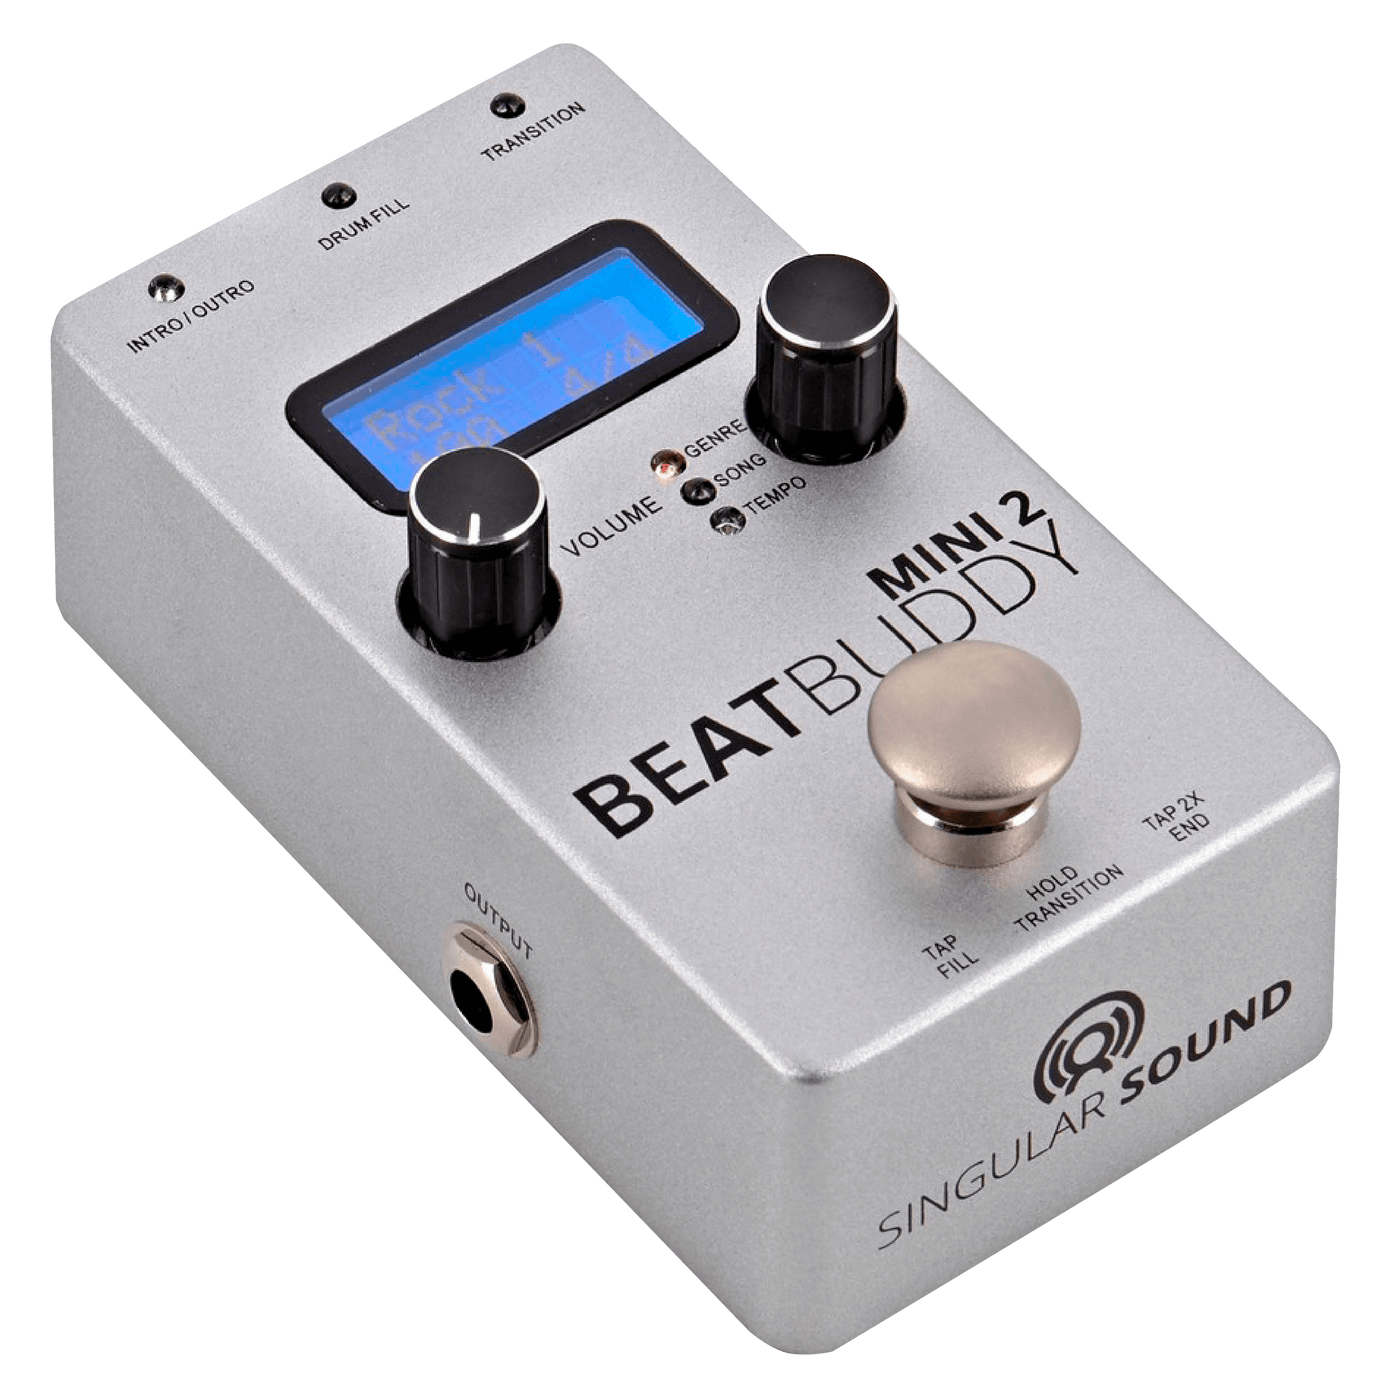 Singular Sound Beatbuddy Mini 2 - $199990 - Gearhub - The BeatBuddy Mini 2 drummer pedal is a more compact and affordable version of the award winning BeatBuddy drummer pedal. It’s used by School of Rock, Taylor Robinson Guitar, Frost School of Music (University of Miami), and more as a tool for efficient and engaging practice. The ability to play along with beats sampled from professional drummers and control them with nothing but your feet will help you improve your musical talent faster than ever before.